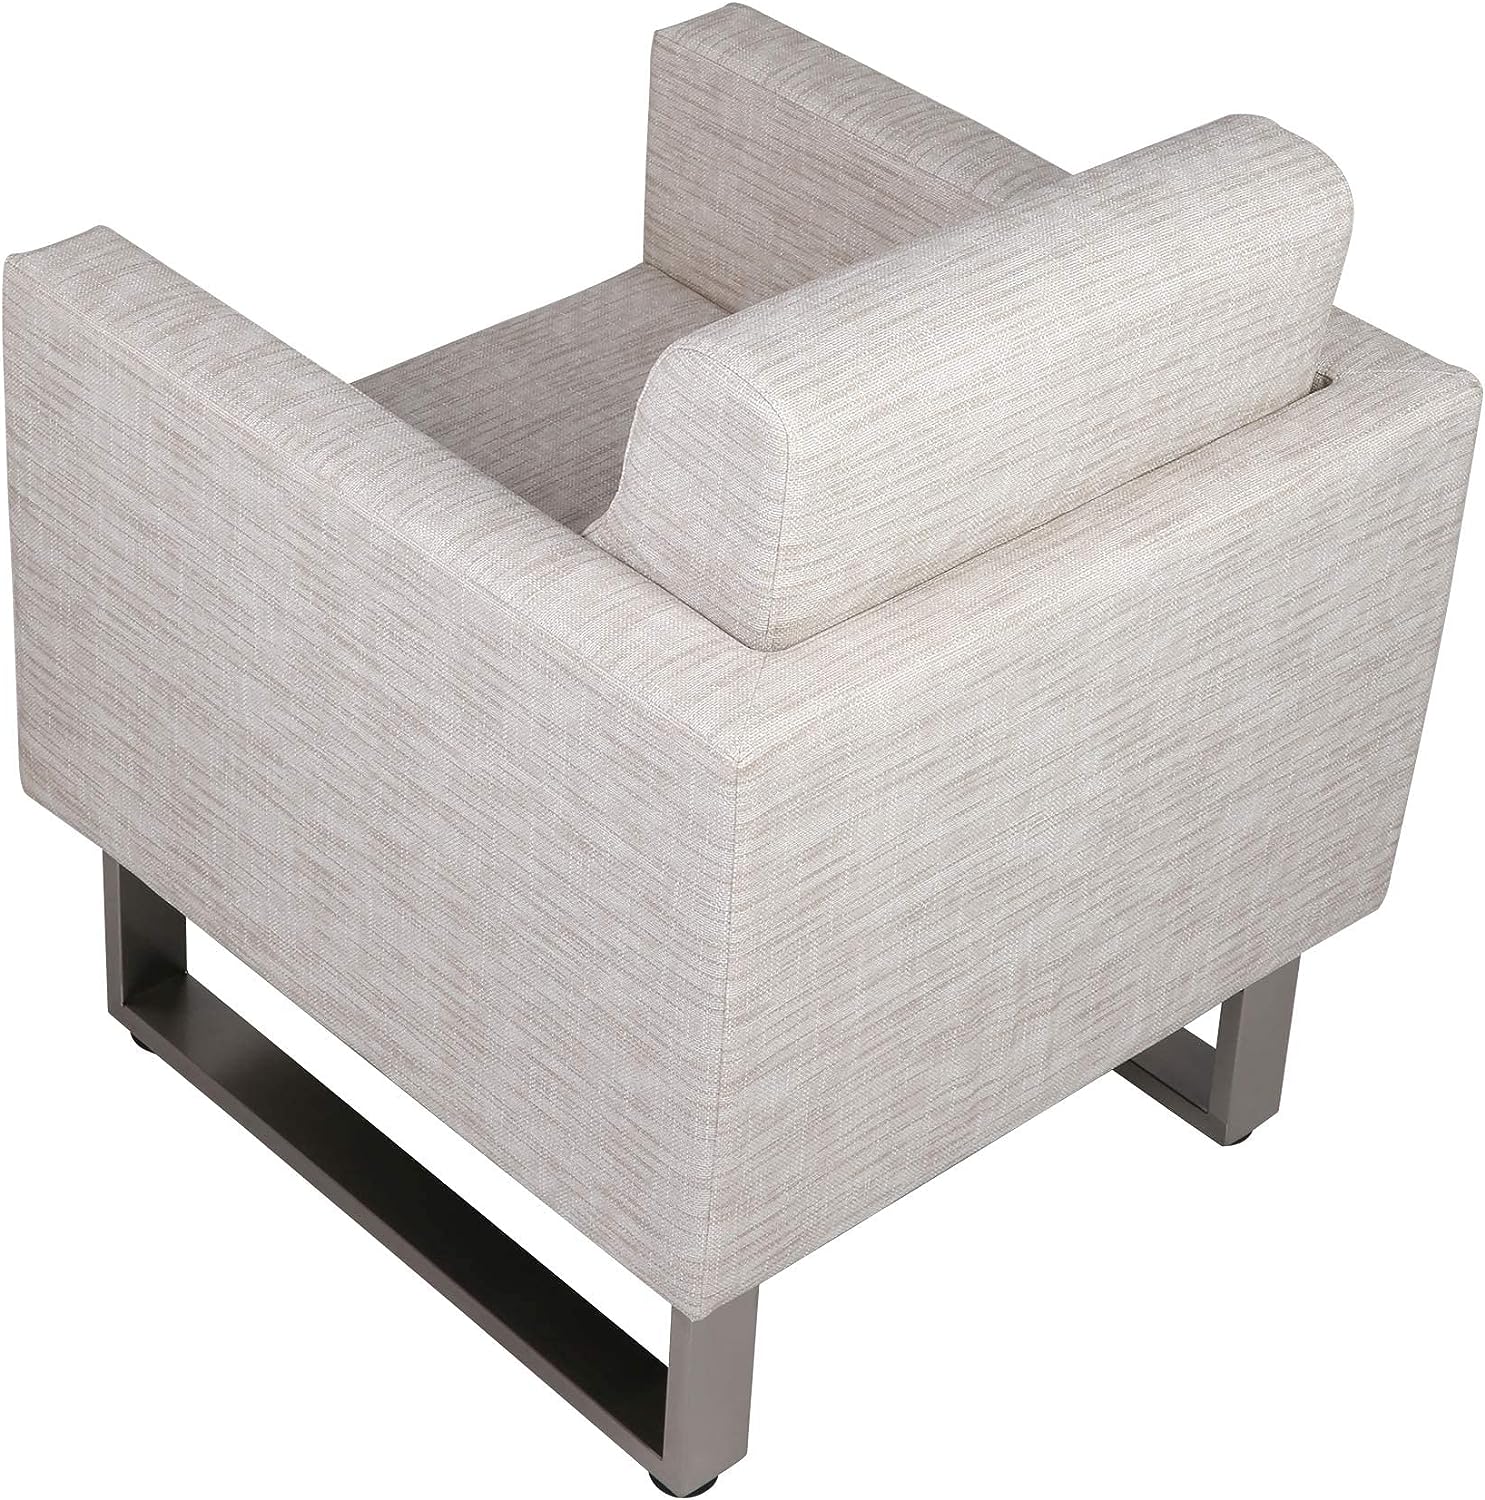 LUCKYERMORE Office Guest Chairs Sofa Leather Club Chairs Accent Chairs with PU Leather Soft Sponge, White